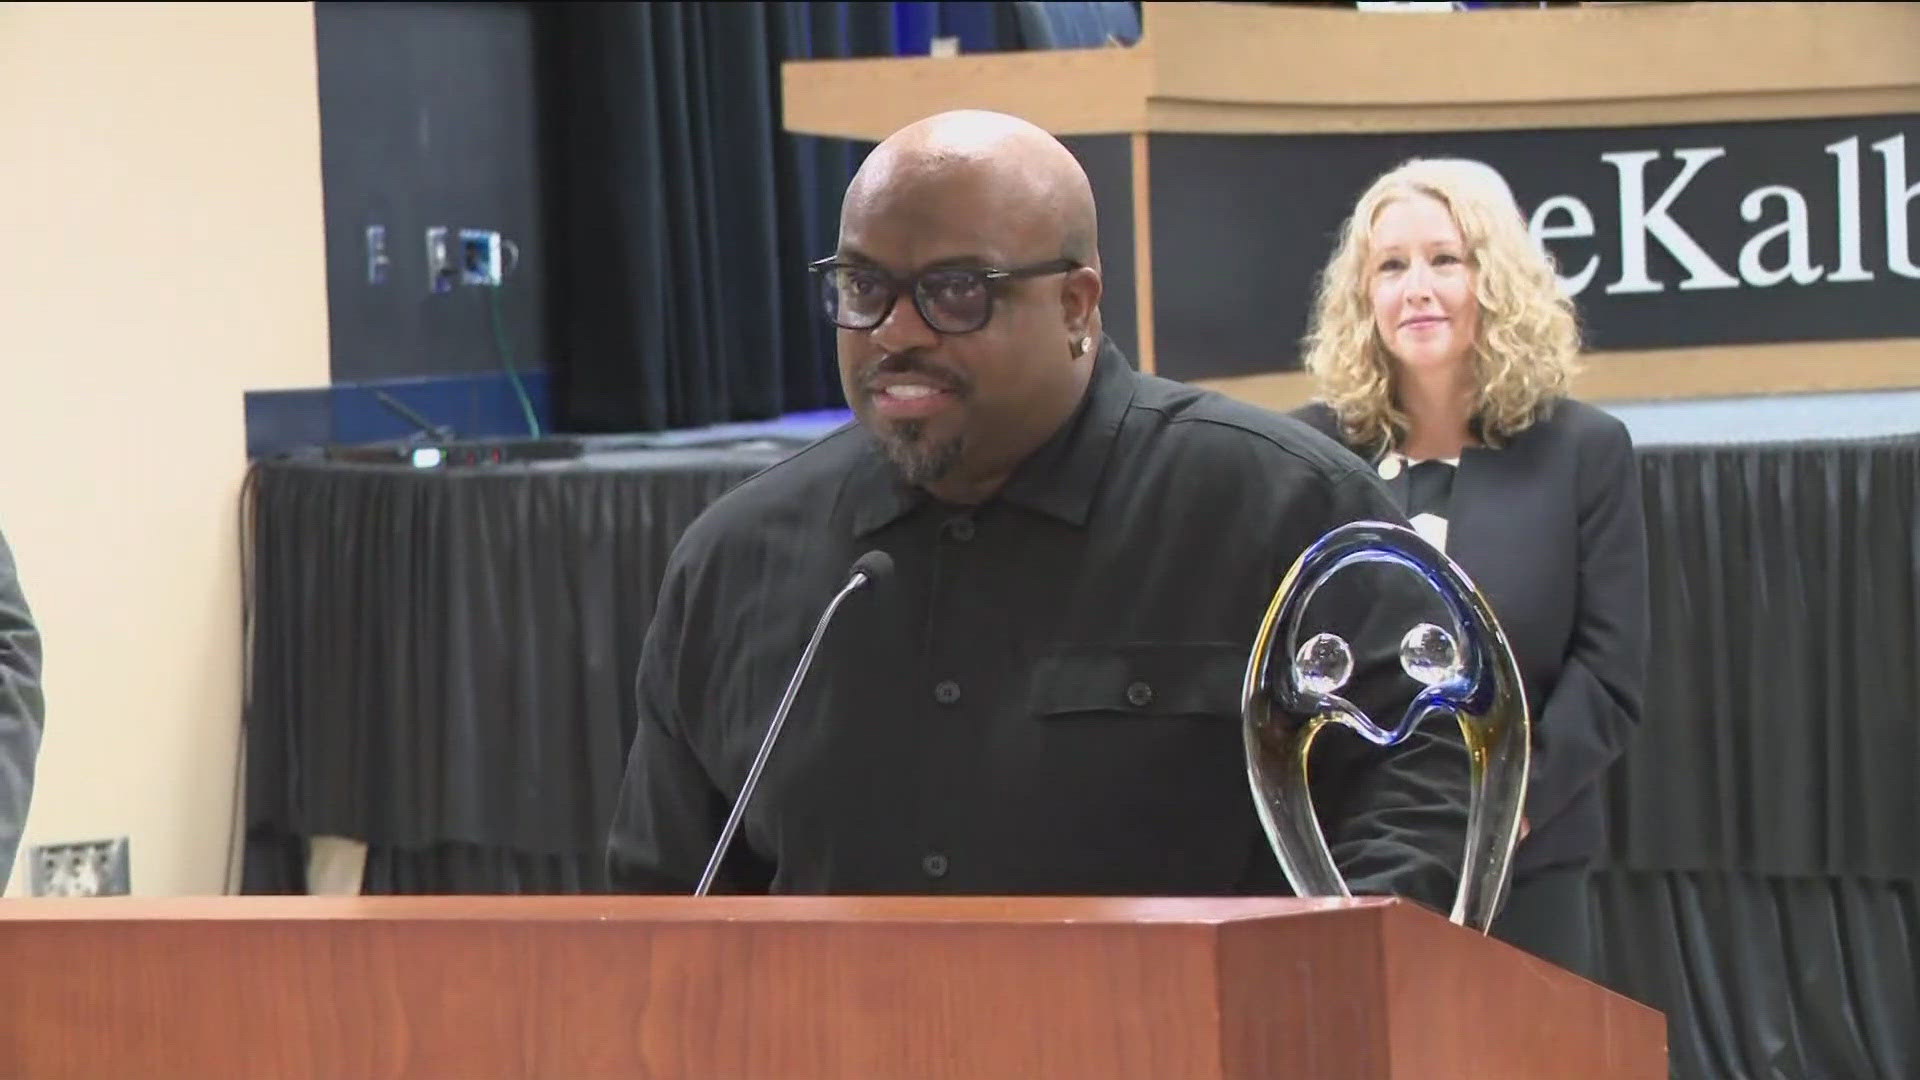 DeKalb County honored local artist CeeLo Green with their highest civilian award today for African American Music Appreciation Month.